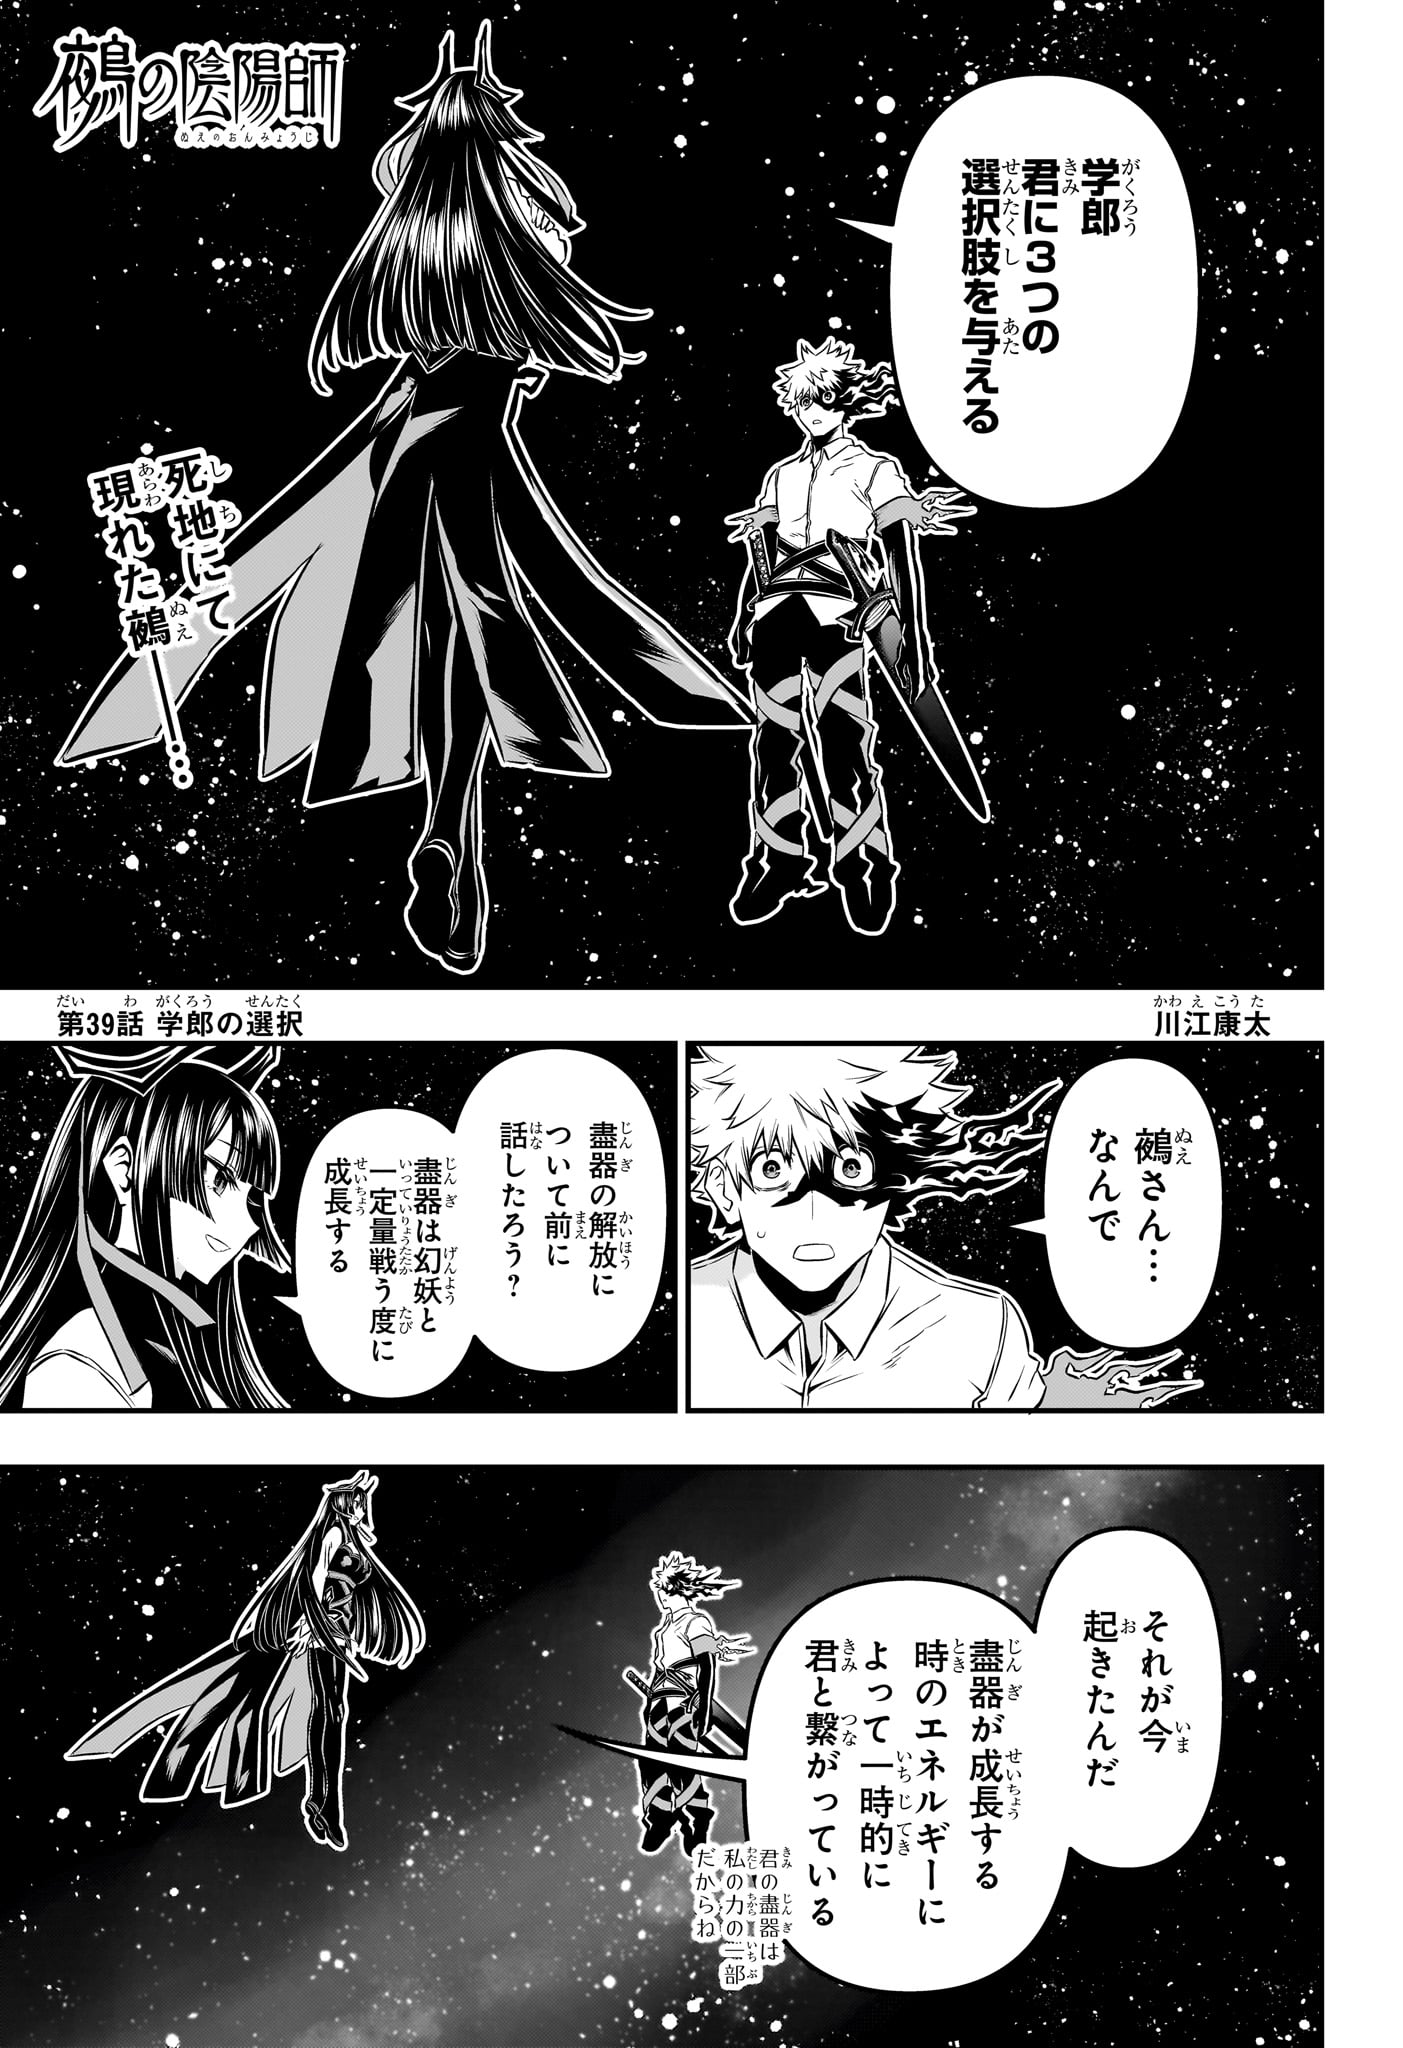 Nue no Onmyouji - Chapter 39 - Page 1